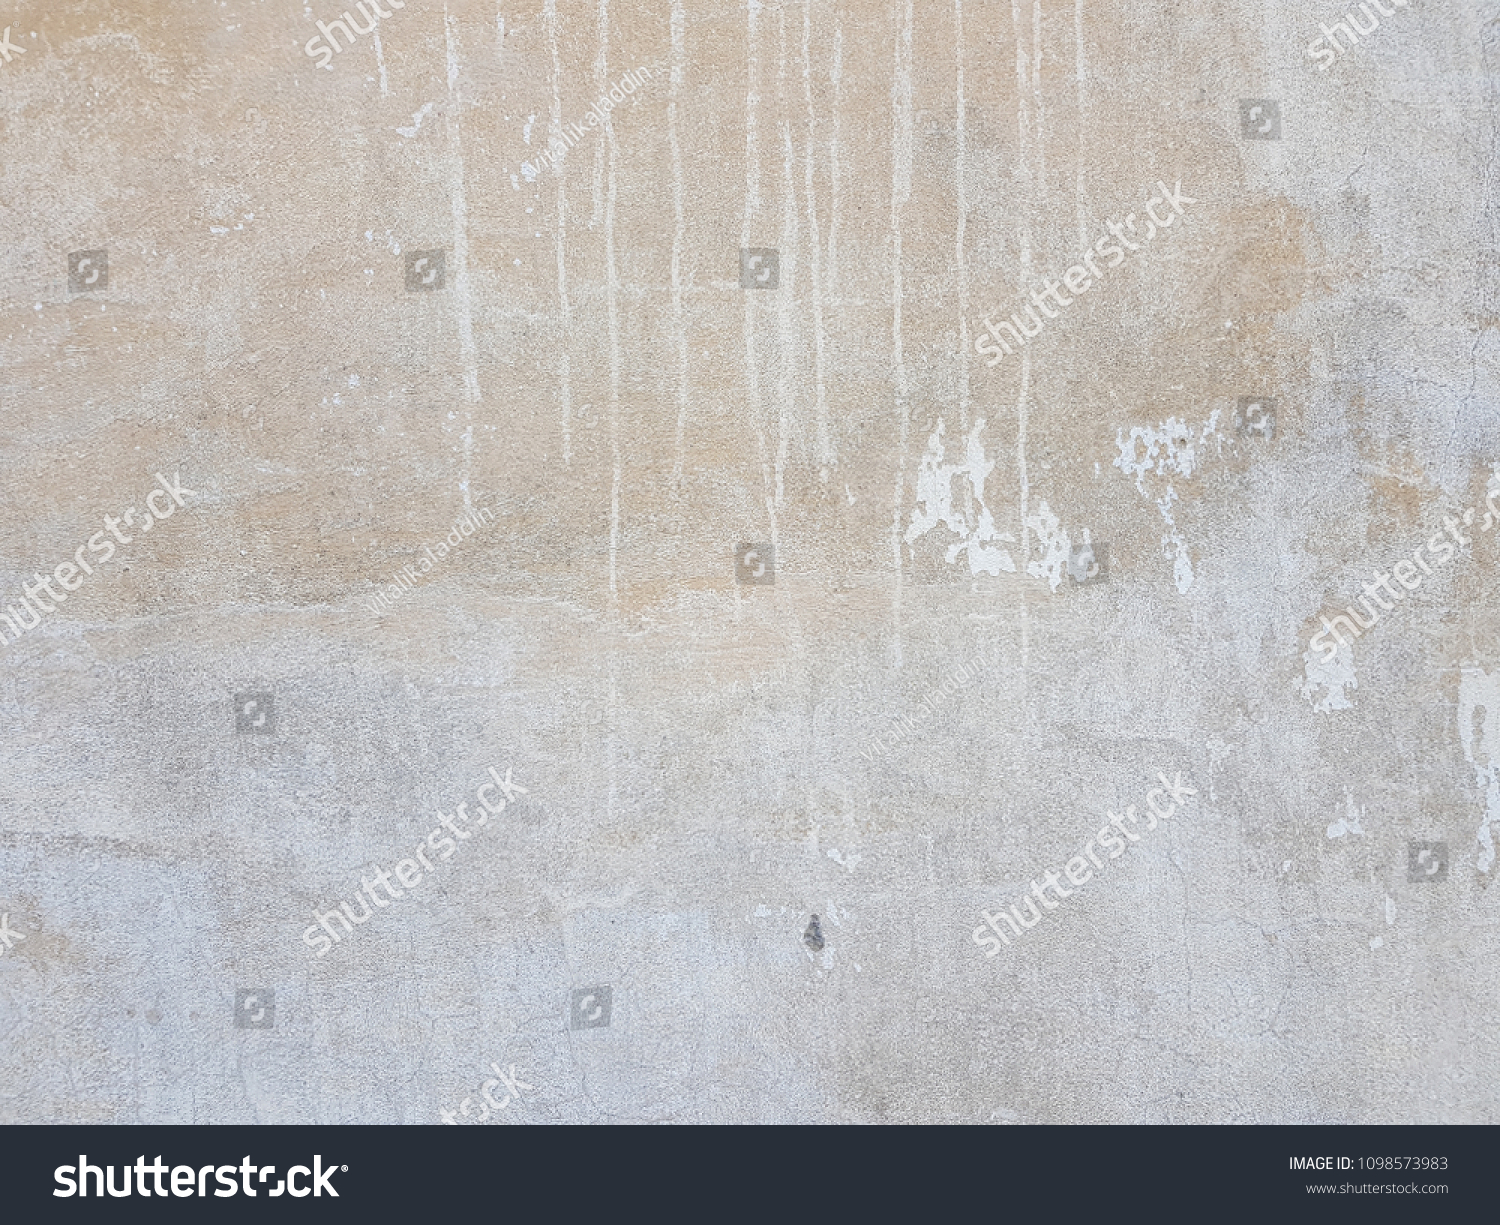 cracked concrete vintage wall background,old wall #1098573983